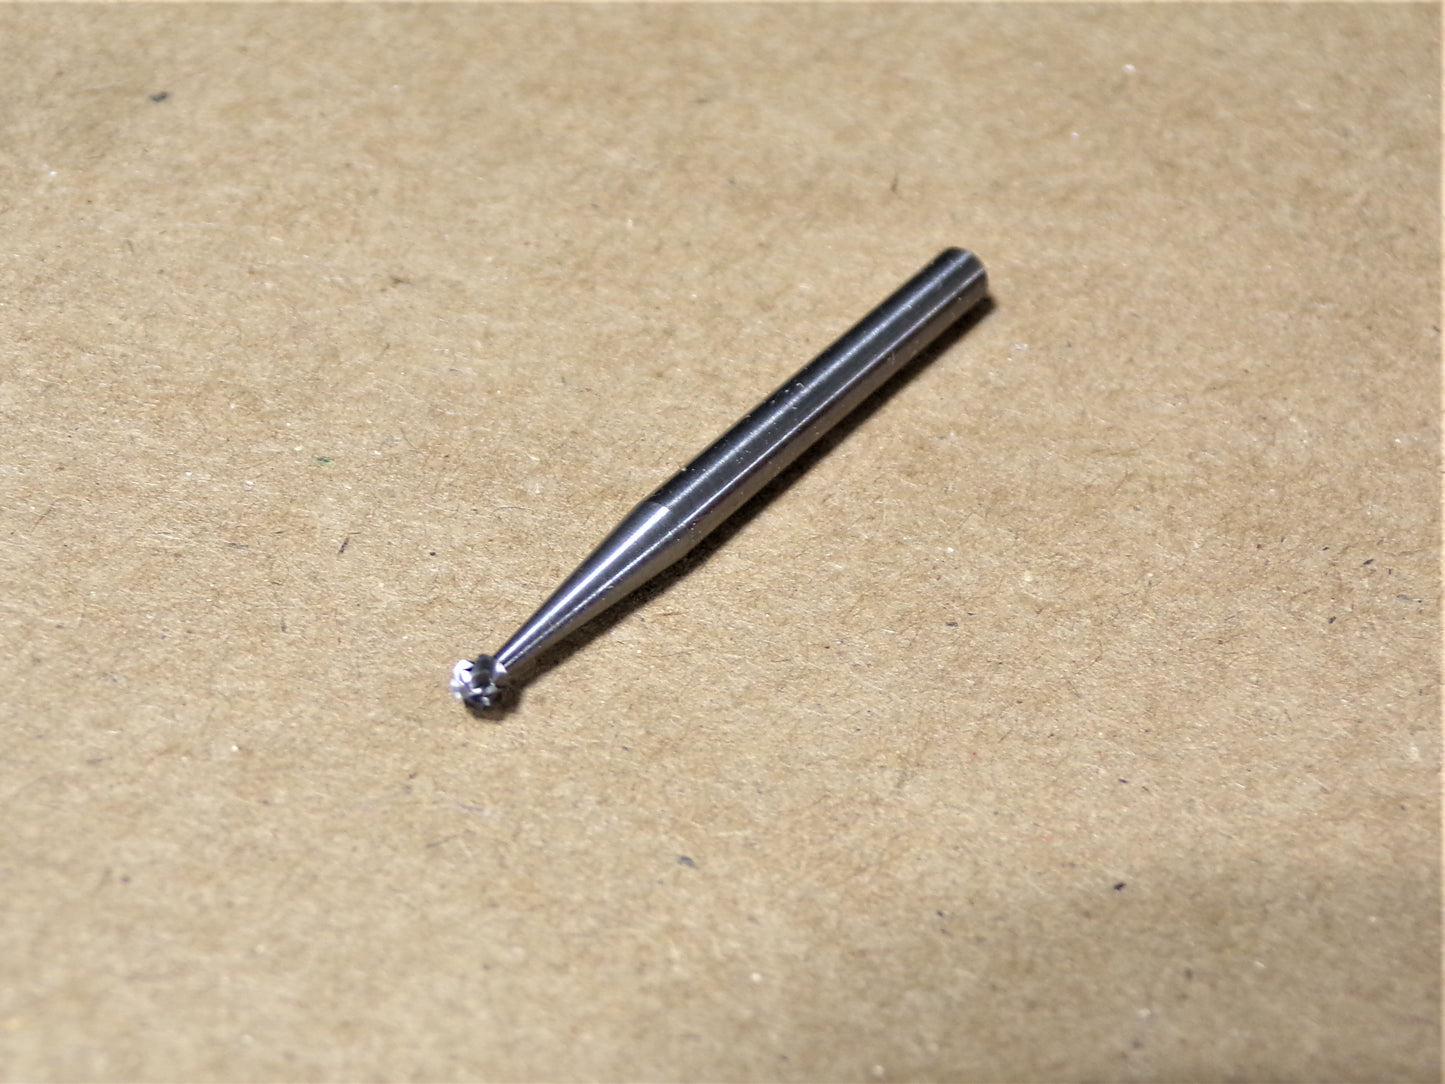 WIDIA METAL REMOVAL Carbide Bur, Length of Cut 3/32 in, Overall Length 1 1/2 in, Trade Number SD-41 (CR00409-BT22)